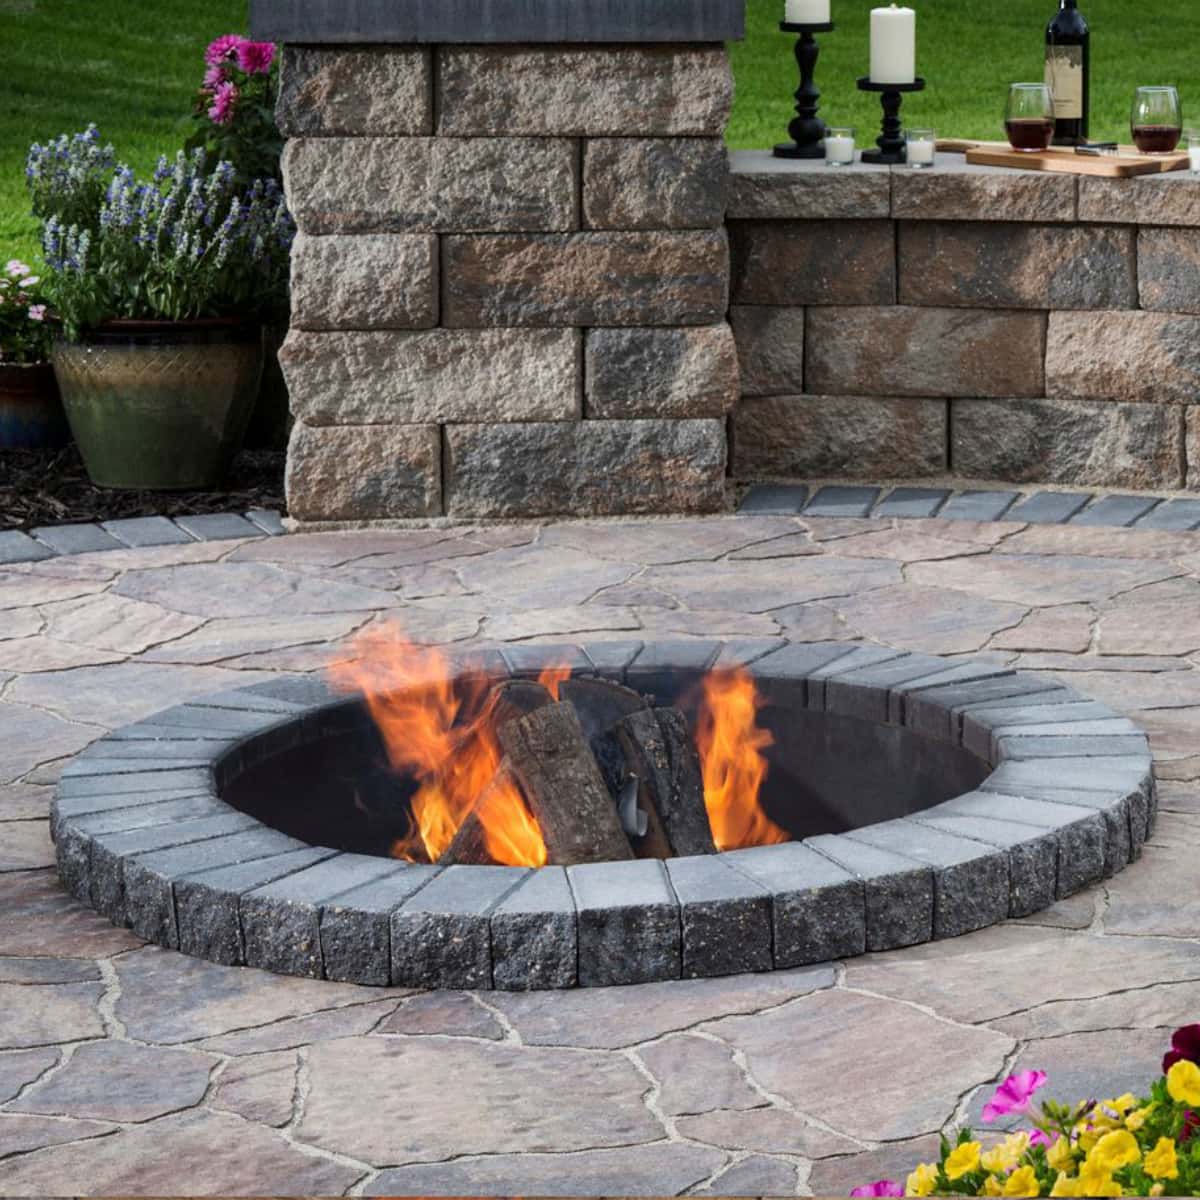 Are Backyard Fire Pits Legal Pit, Is It Illegal To Have A Fire Pit In Your Backyard